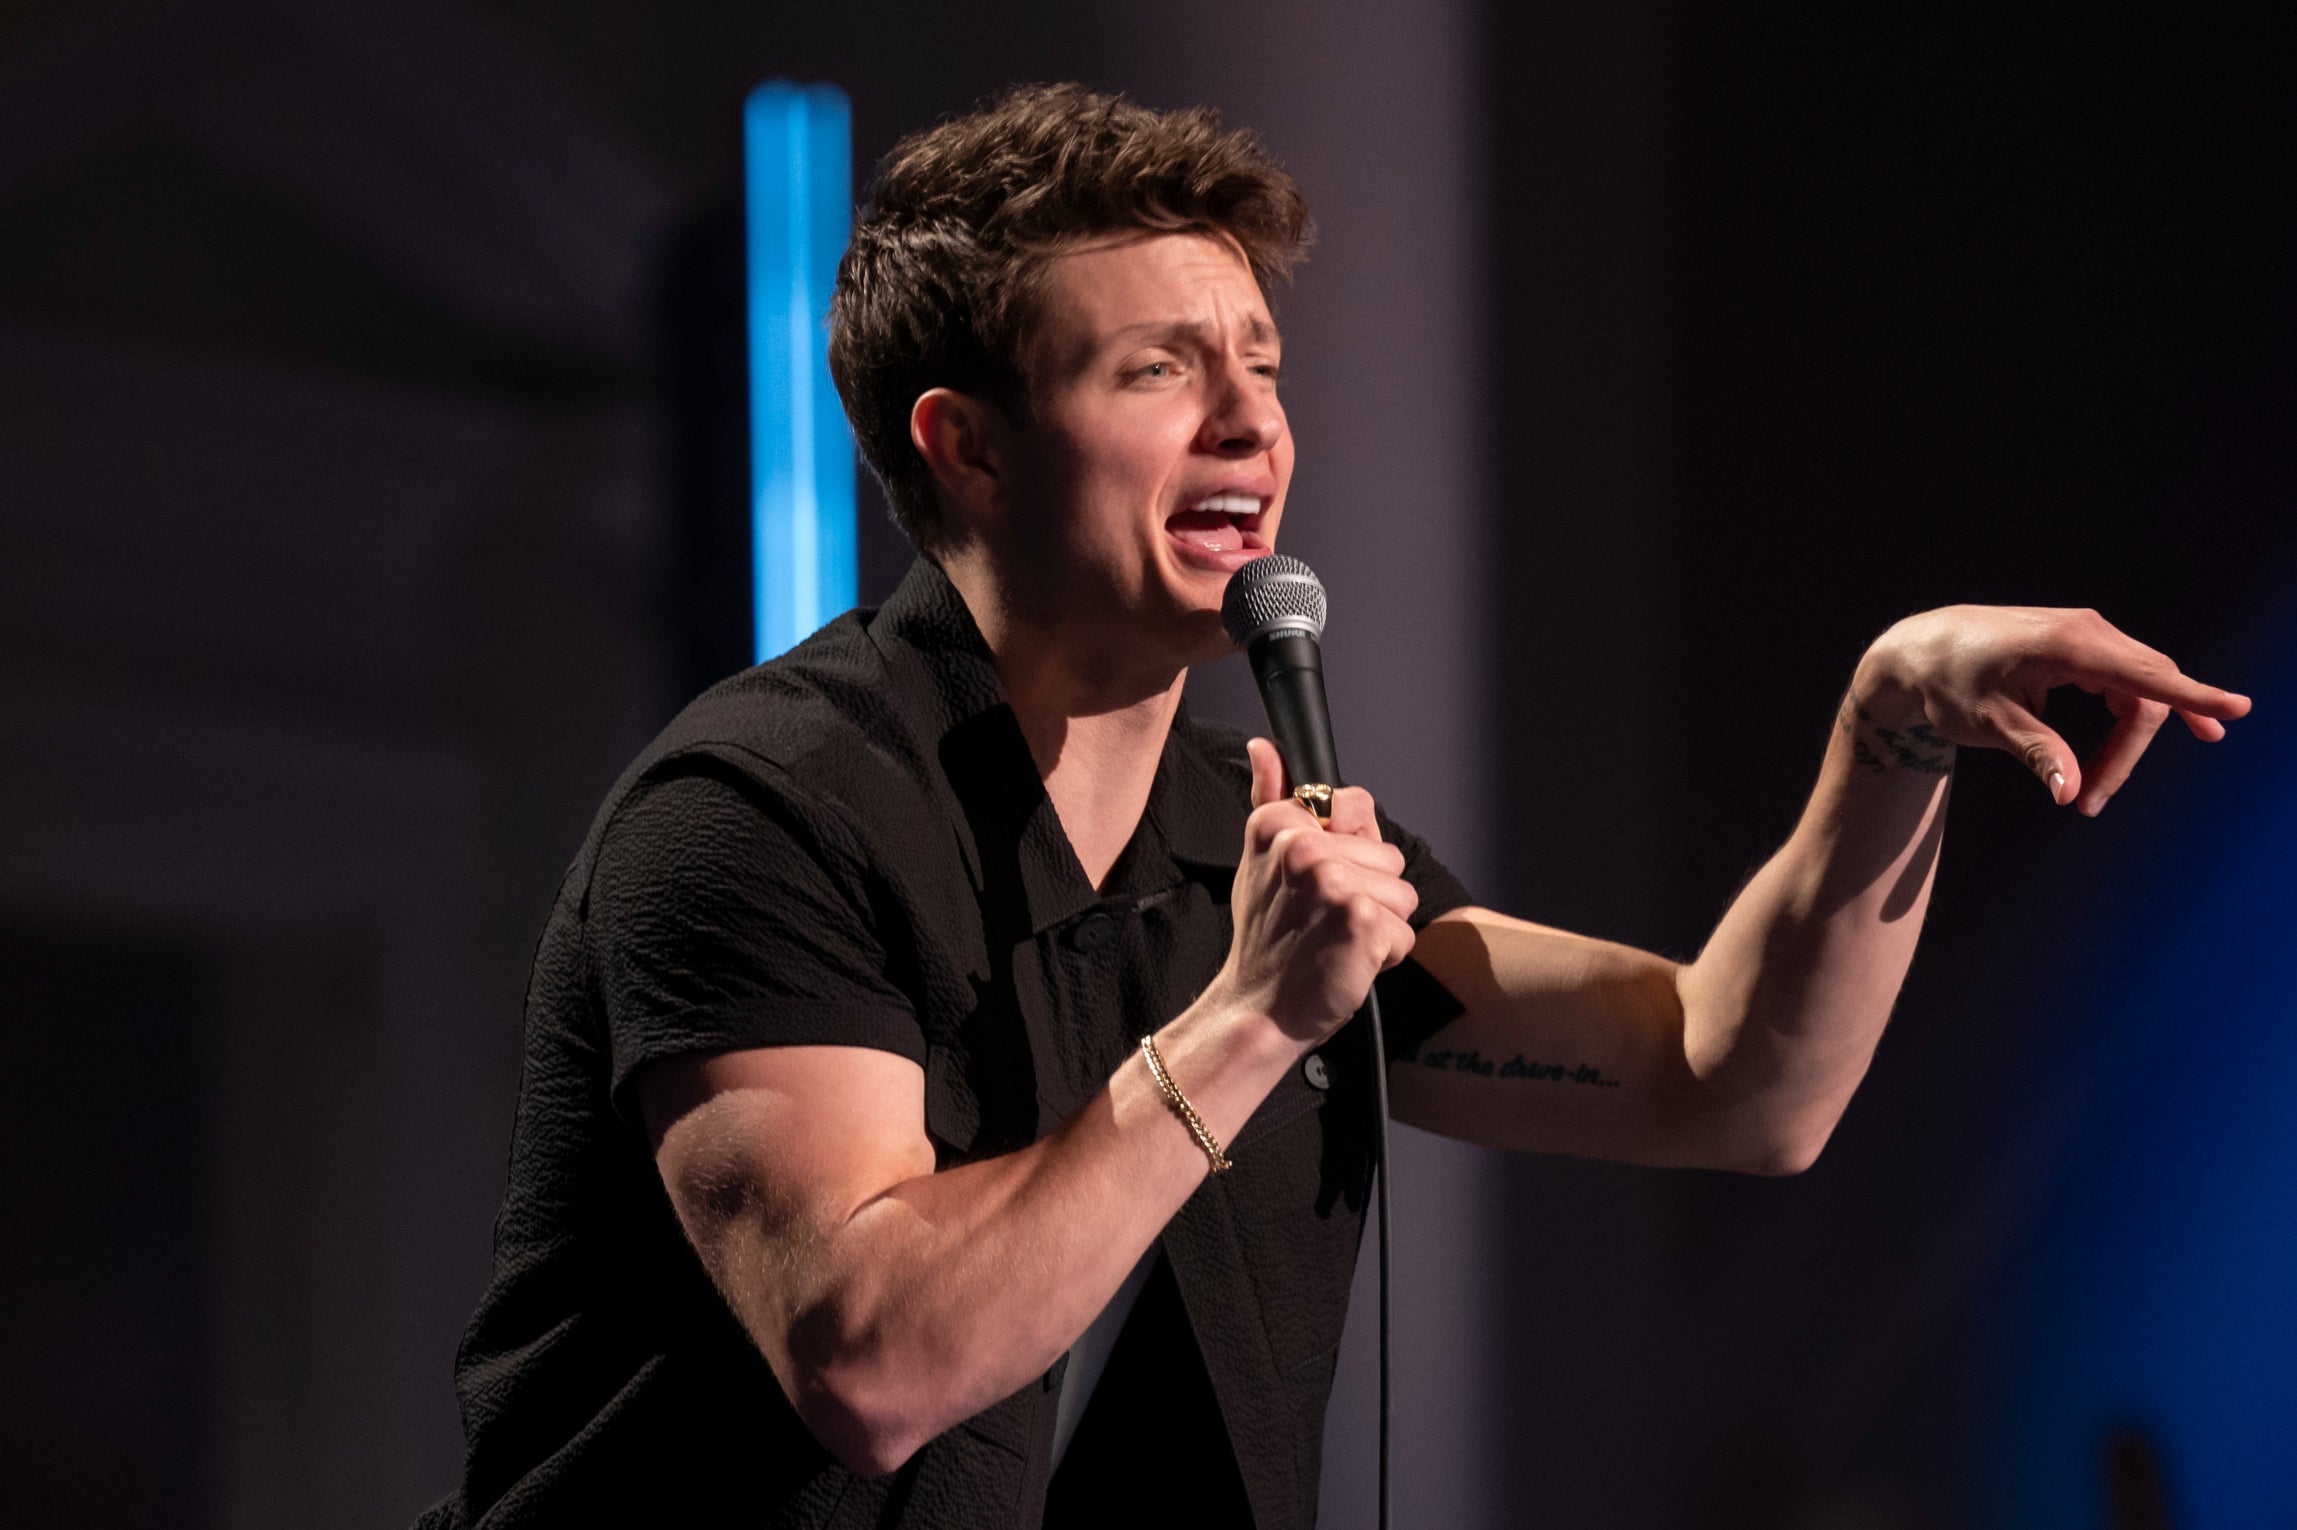 'Not Matt Rife building his platform on catering to his female audience and then opening his Netflix special with a domestic violence joke’, a viewer posted on Twitter/X